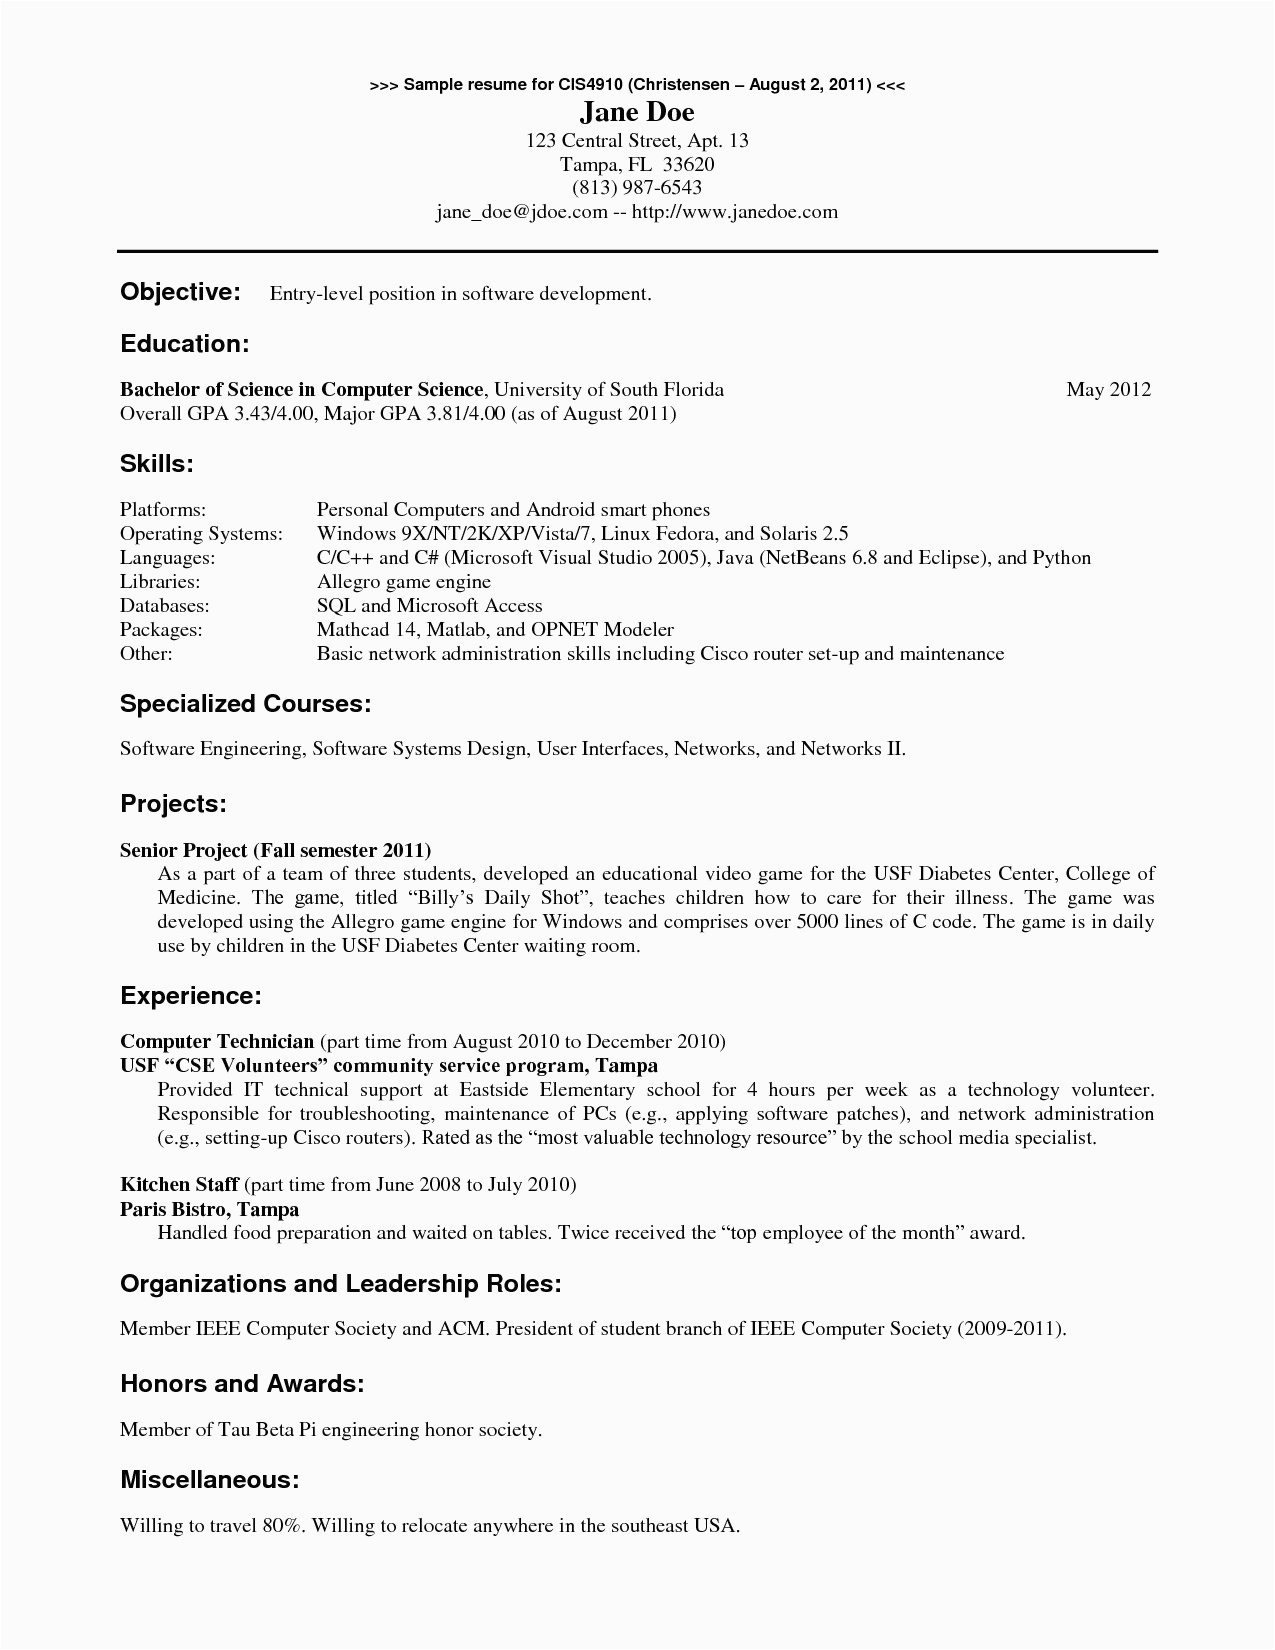 Sample Resume for Lecturer In Computer Science with Experience Resume Samples for Lecturer In Puter Science